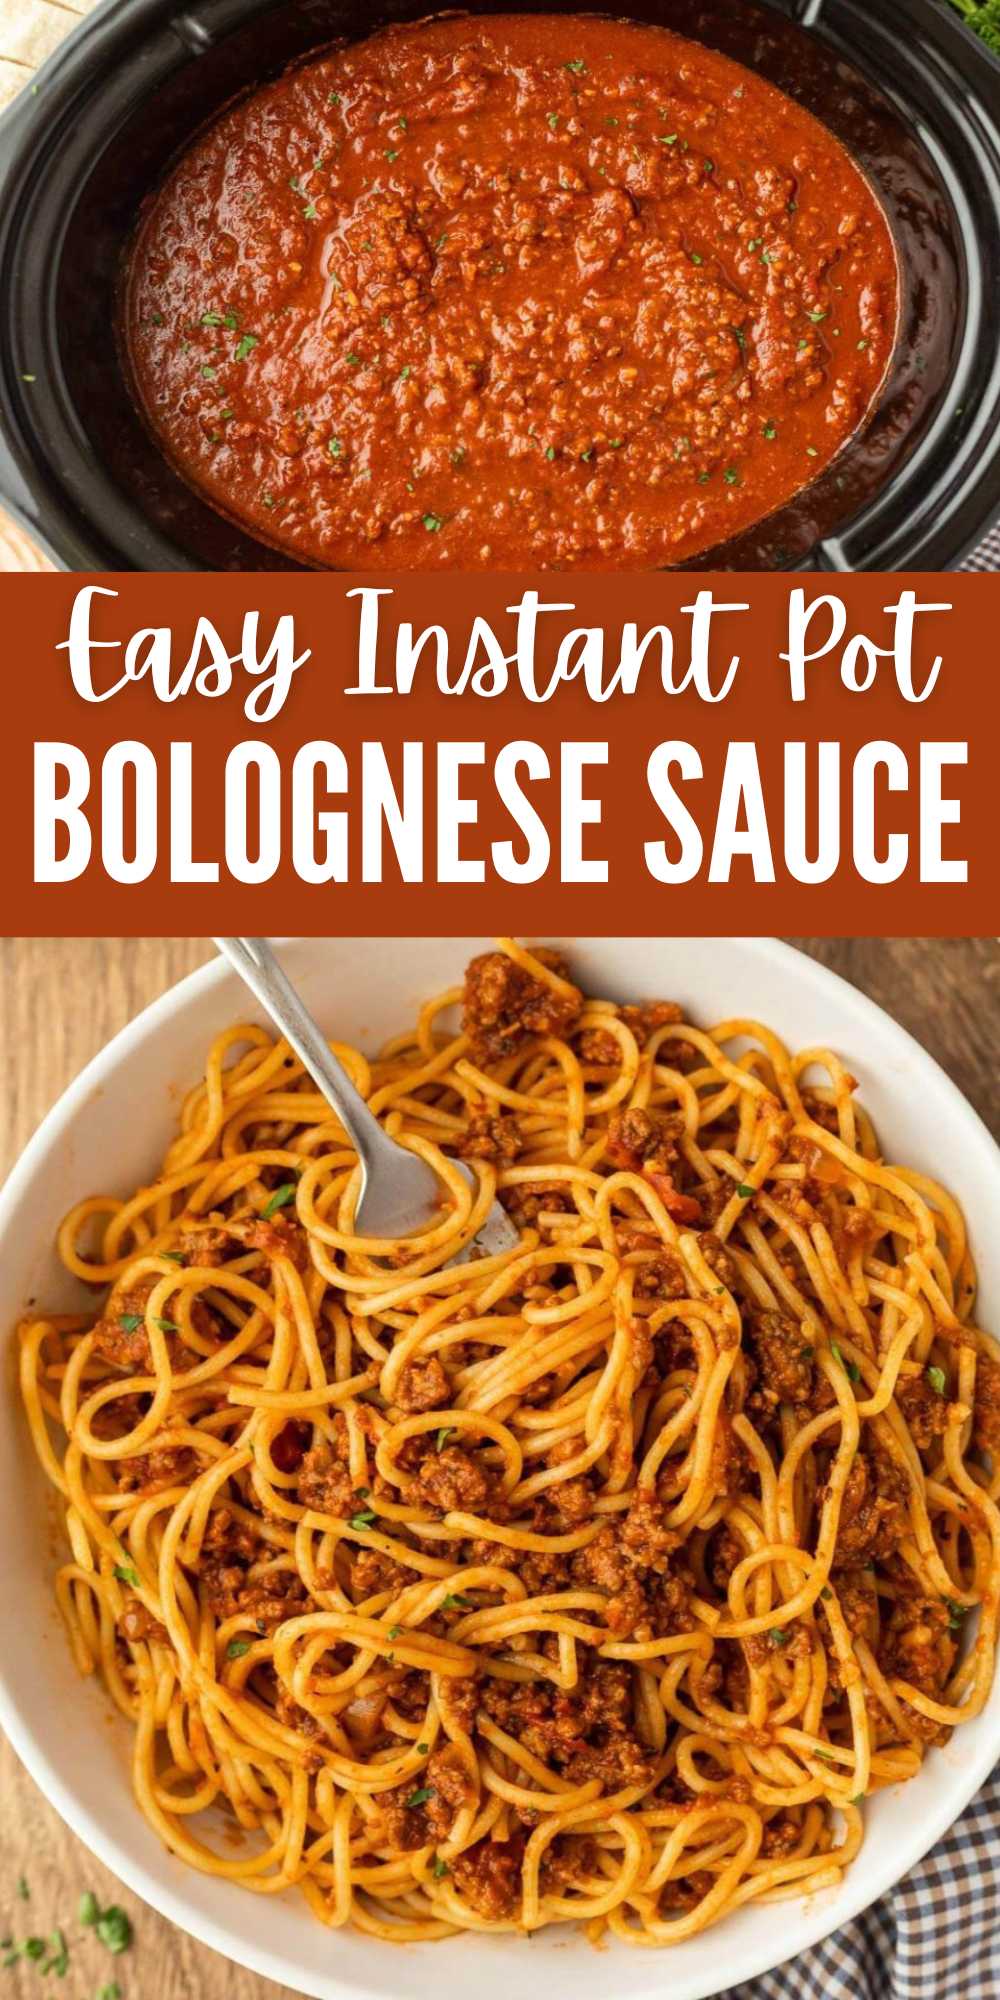 Enjoy Instant Pot Bolognese Sauce Recipe fast. Quick and easy Instant pot Dinner recipe that tastes amazing. Take your classic spaghetti sauce up a notch with the classic bolognese sauce recipe. Serve with your favorite noodles, side dishes and vegetables for a complete meal idea. #eatingonadime #instantpotbolognesesauce #bolognesesauce